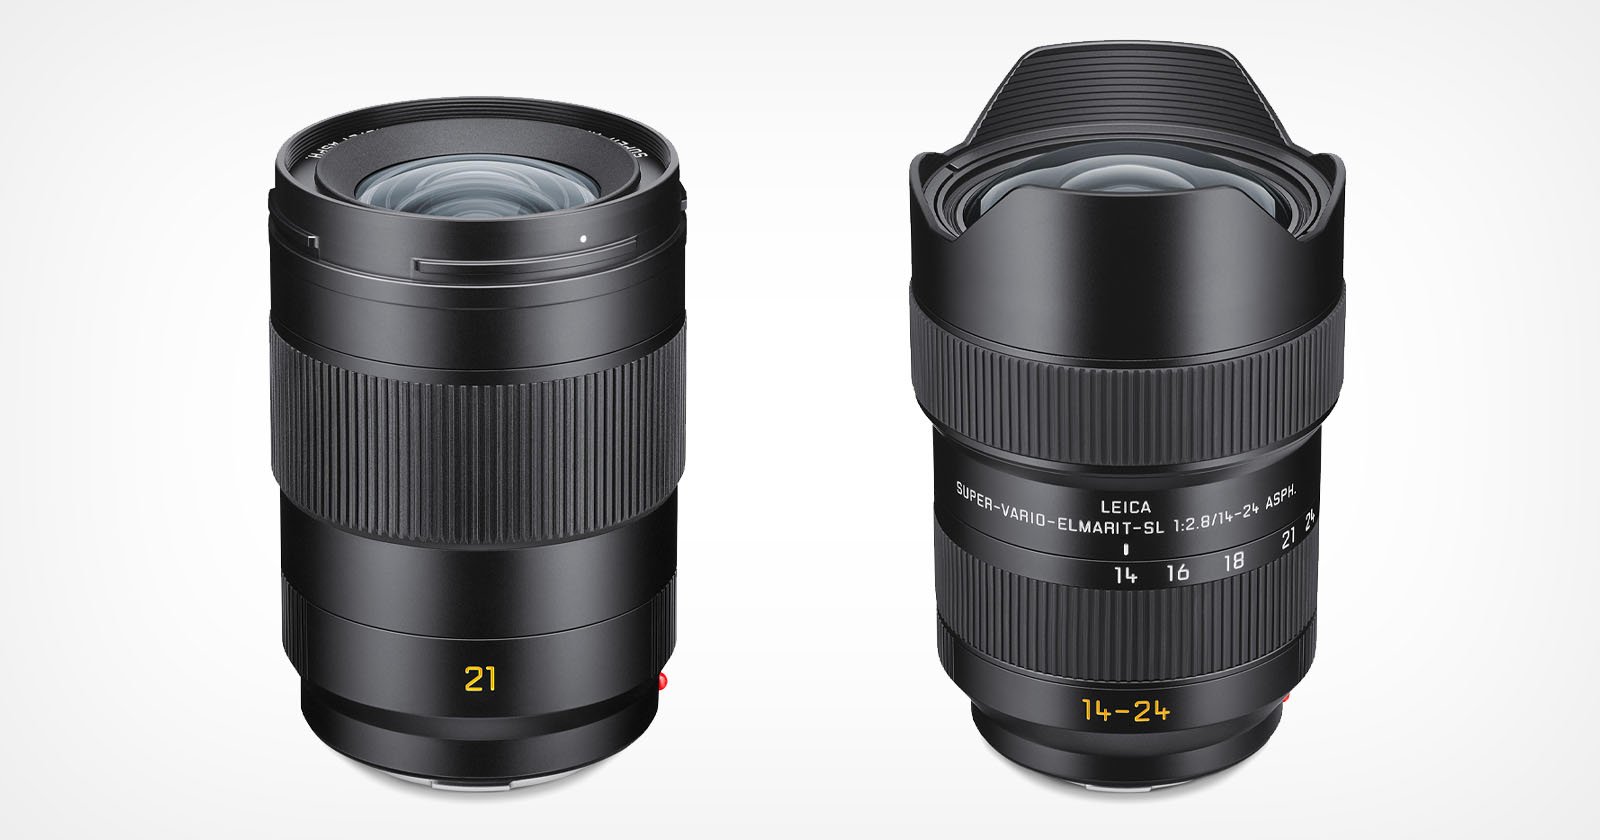 Leica Expands its L-Mount Support with 21mm f/2 and 14-24mm f/2.8